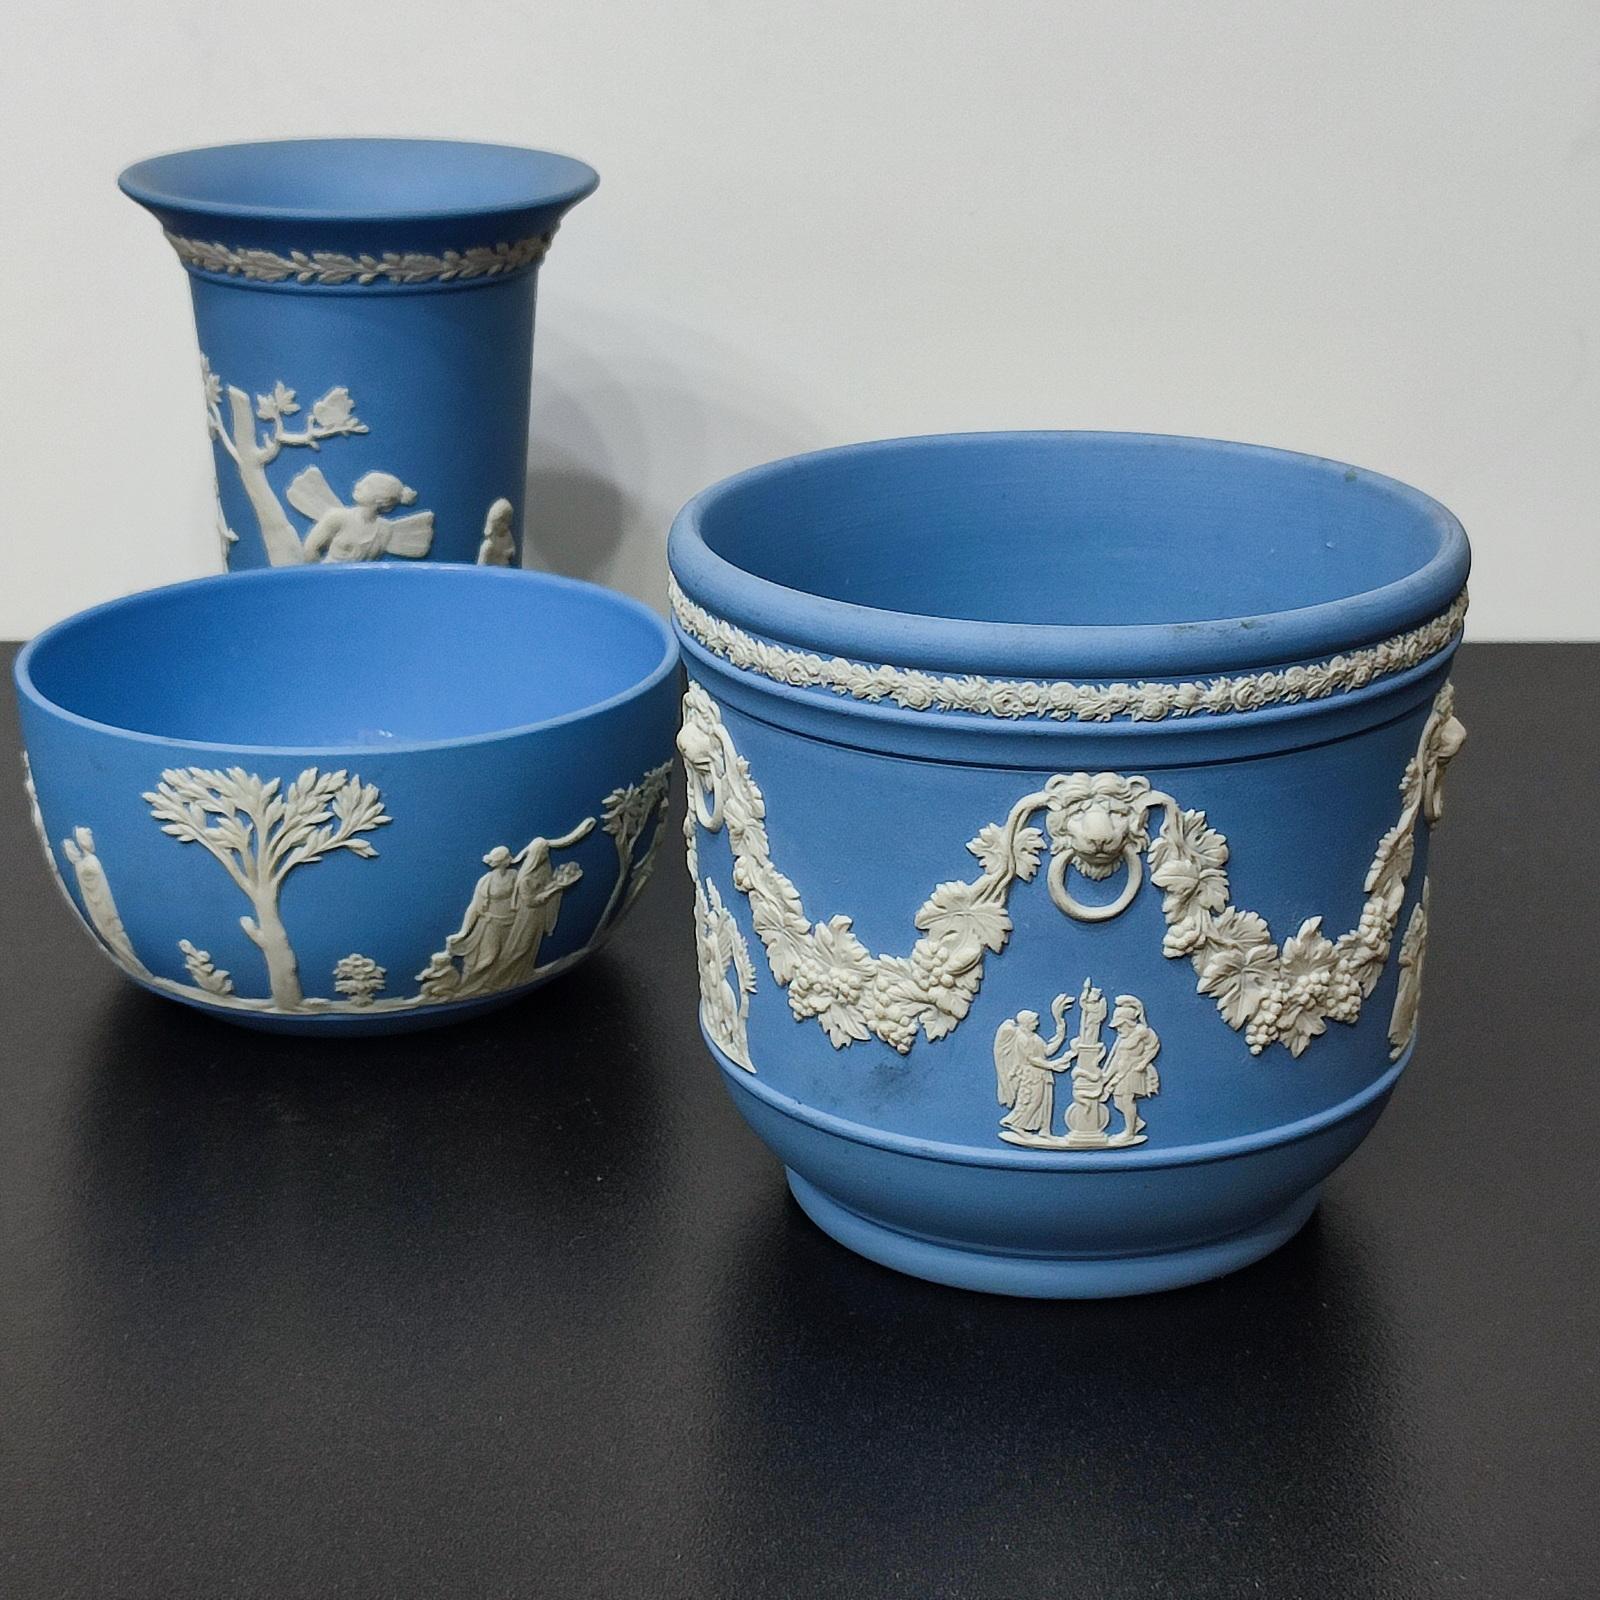 Ceramic Wedgwood Blue Jasper Ware Vessels Classical Scenes, Collection of 3, FREESHIP For Sale